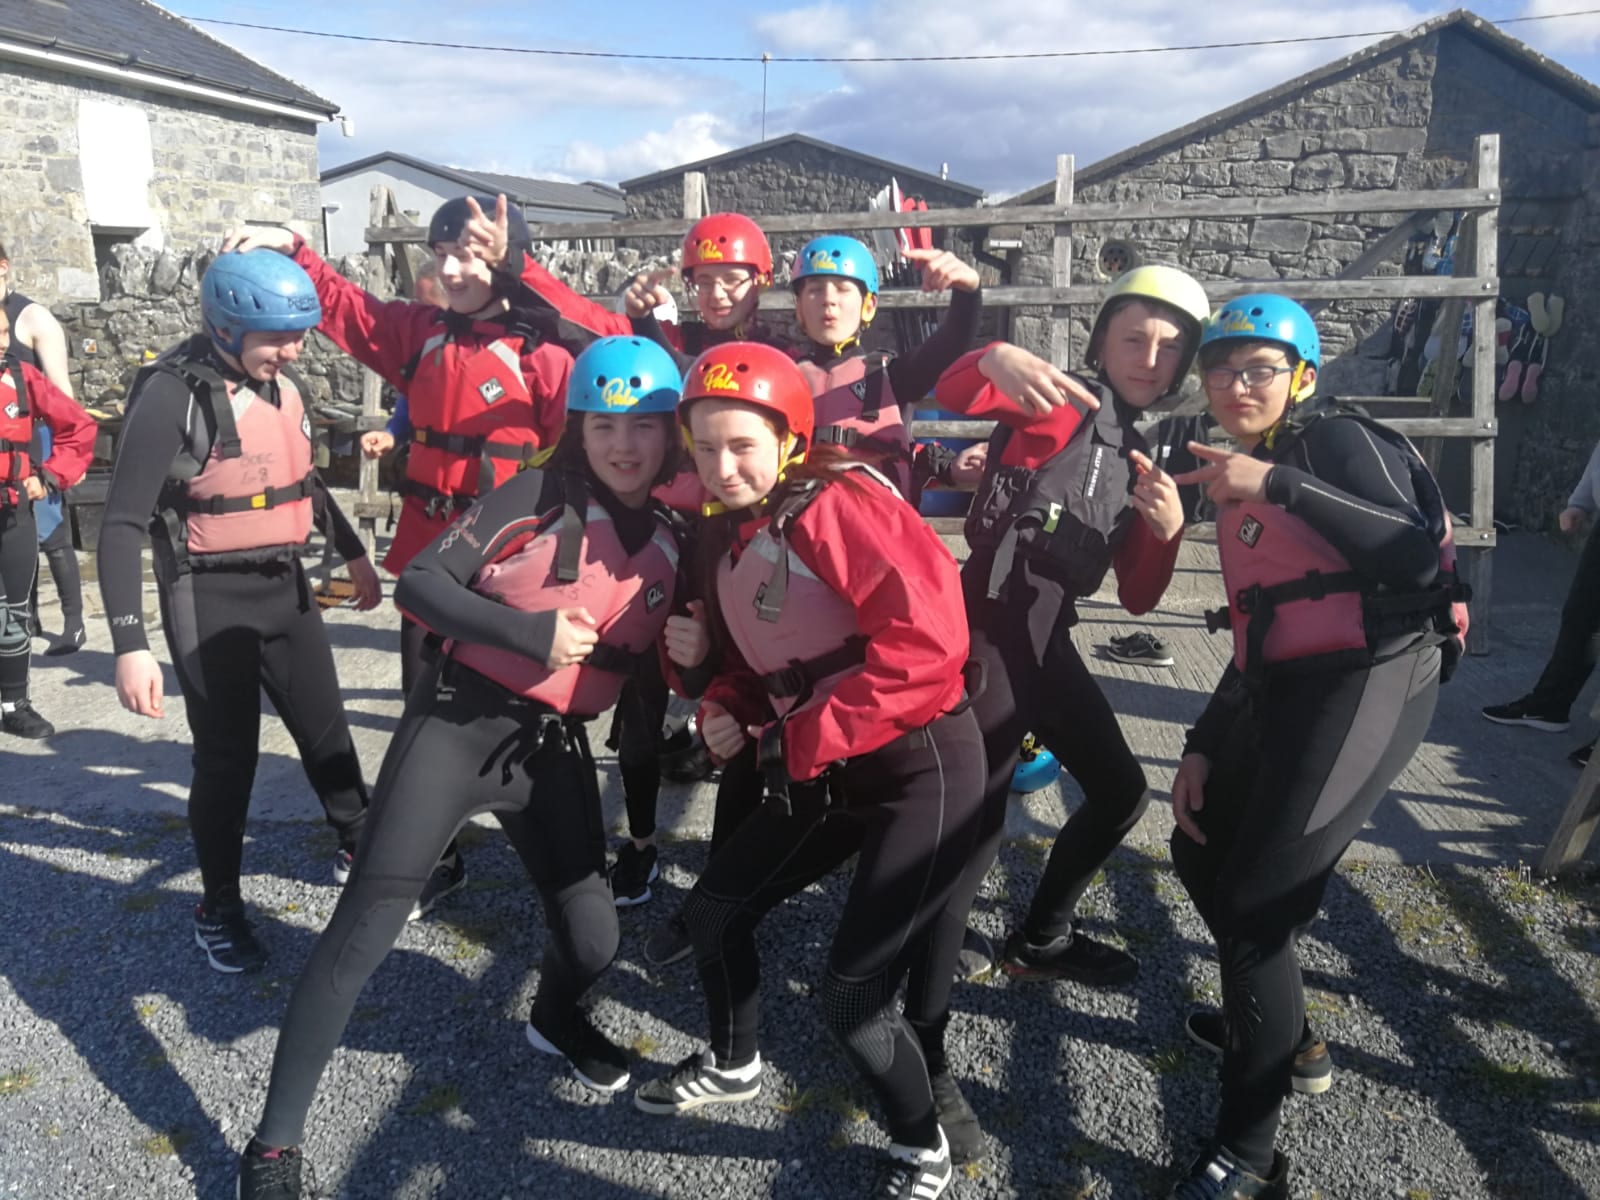 Some First Year Students about to get ready for kayaking and raft building in the Burren